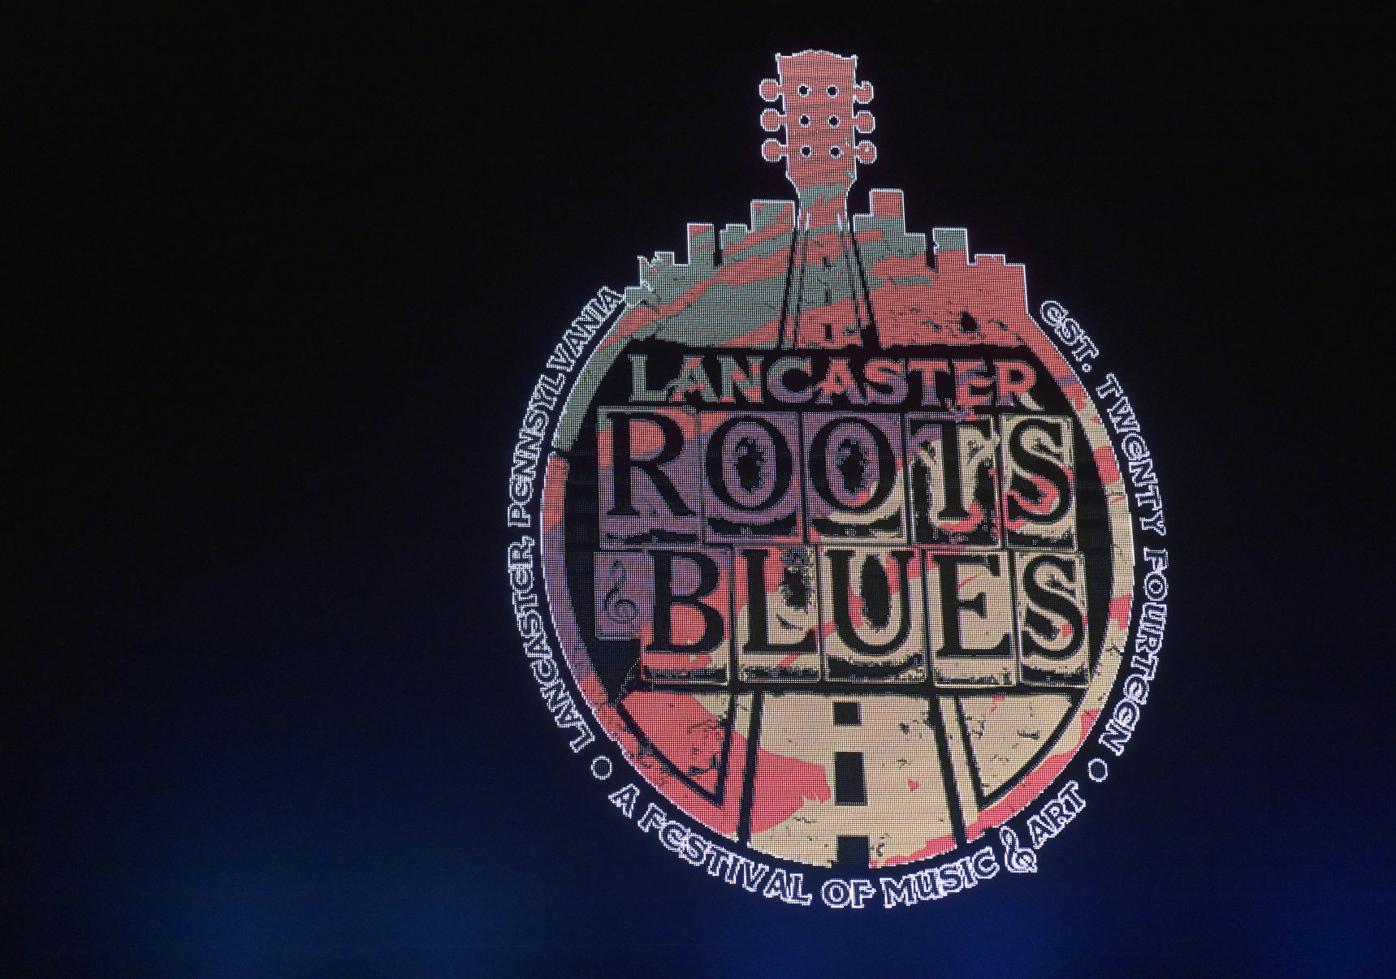 The founder of Lancaster's Roots & Blues festival owes 200K to artists